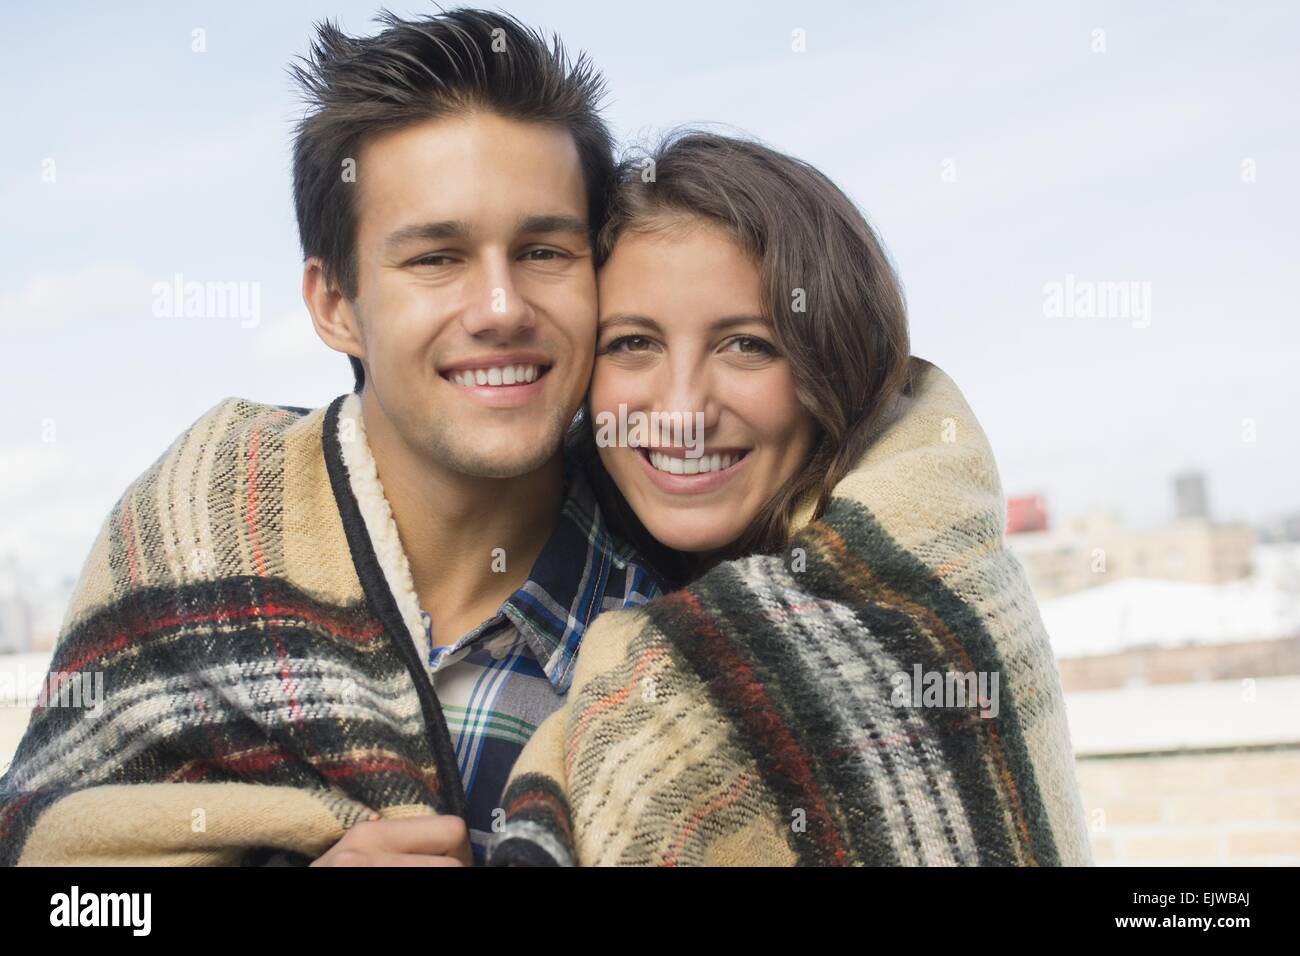 USA, New York State, New York City, Brooklyn, Portrait of young couple wrapped in blanket Stock Photo